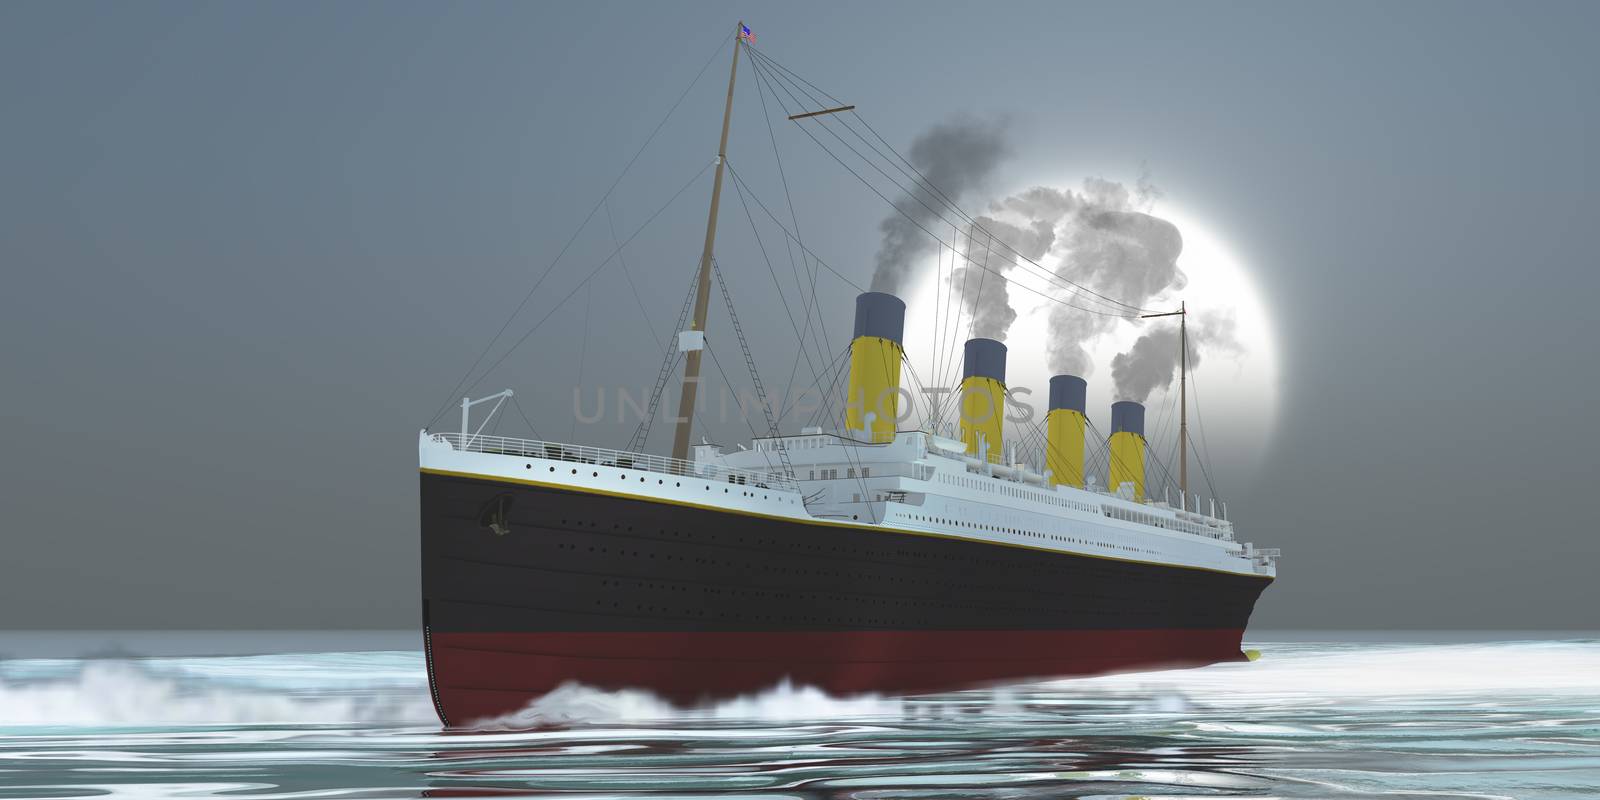 An large ocean liner ship carries its passengers to a disaster filled evening.